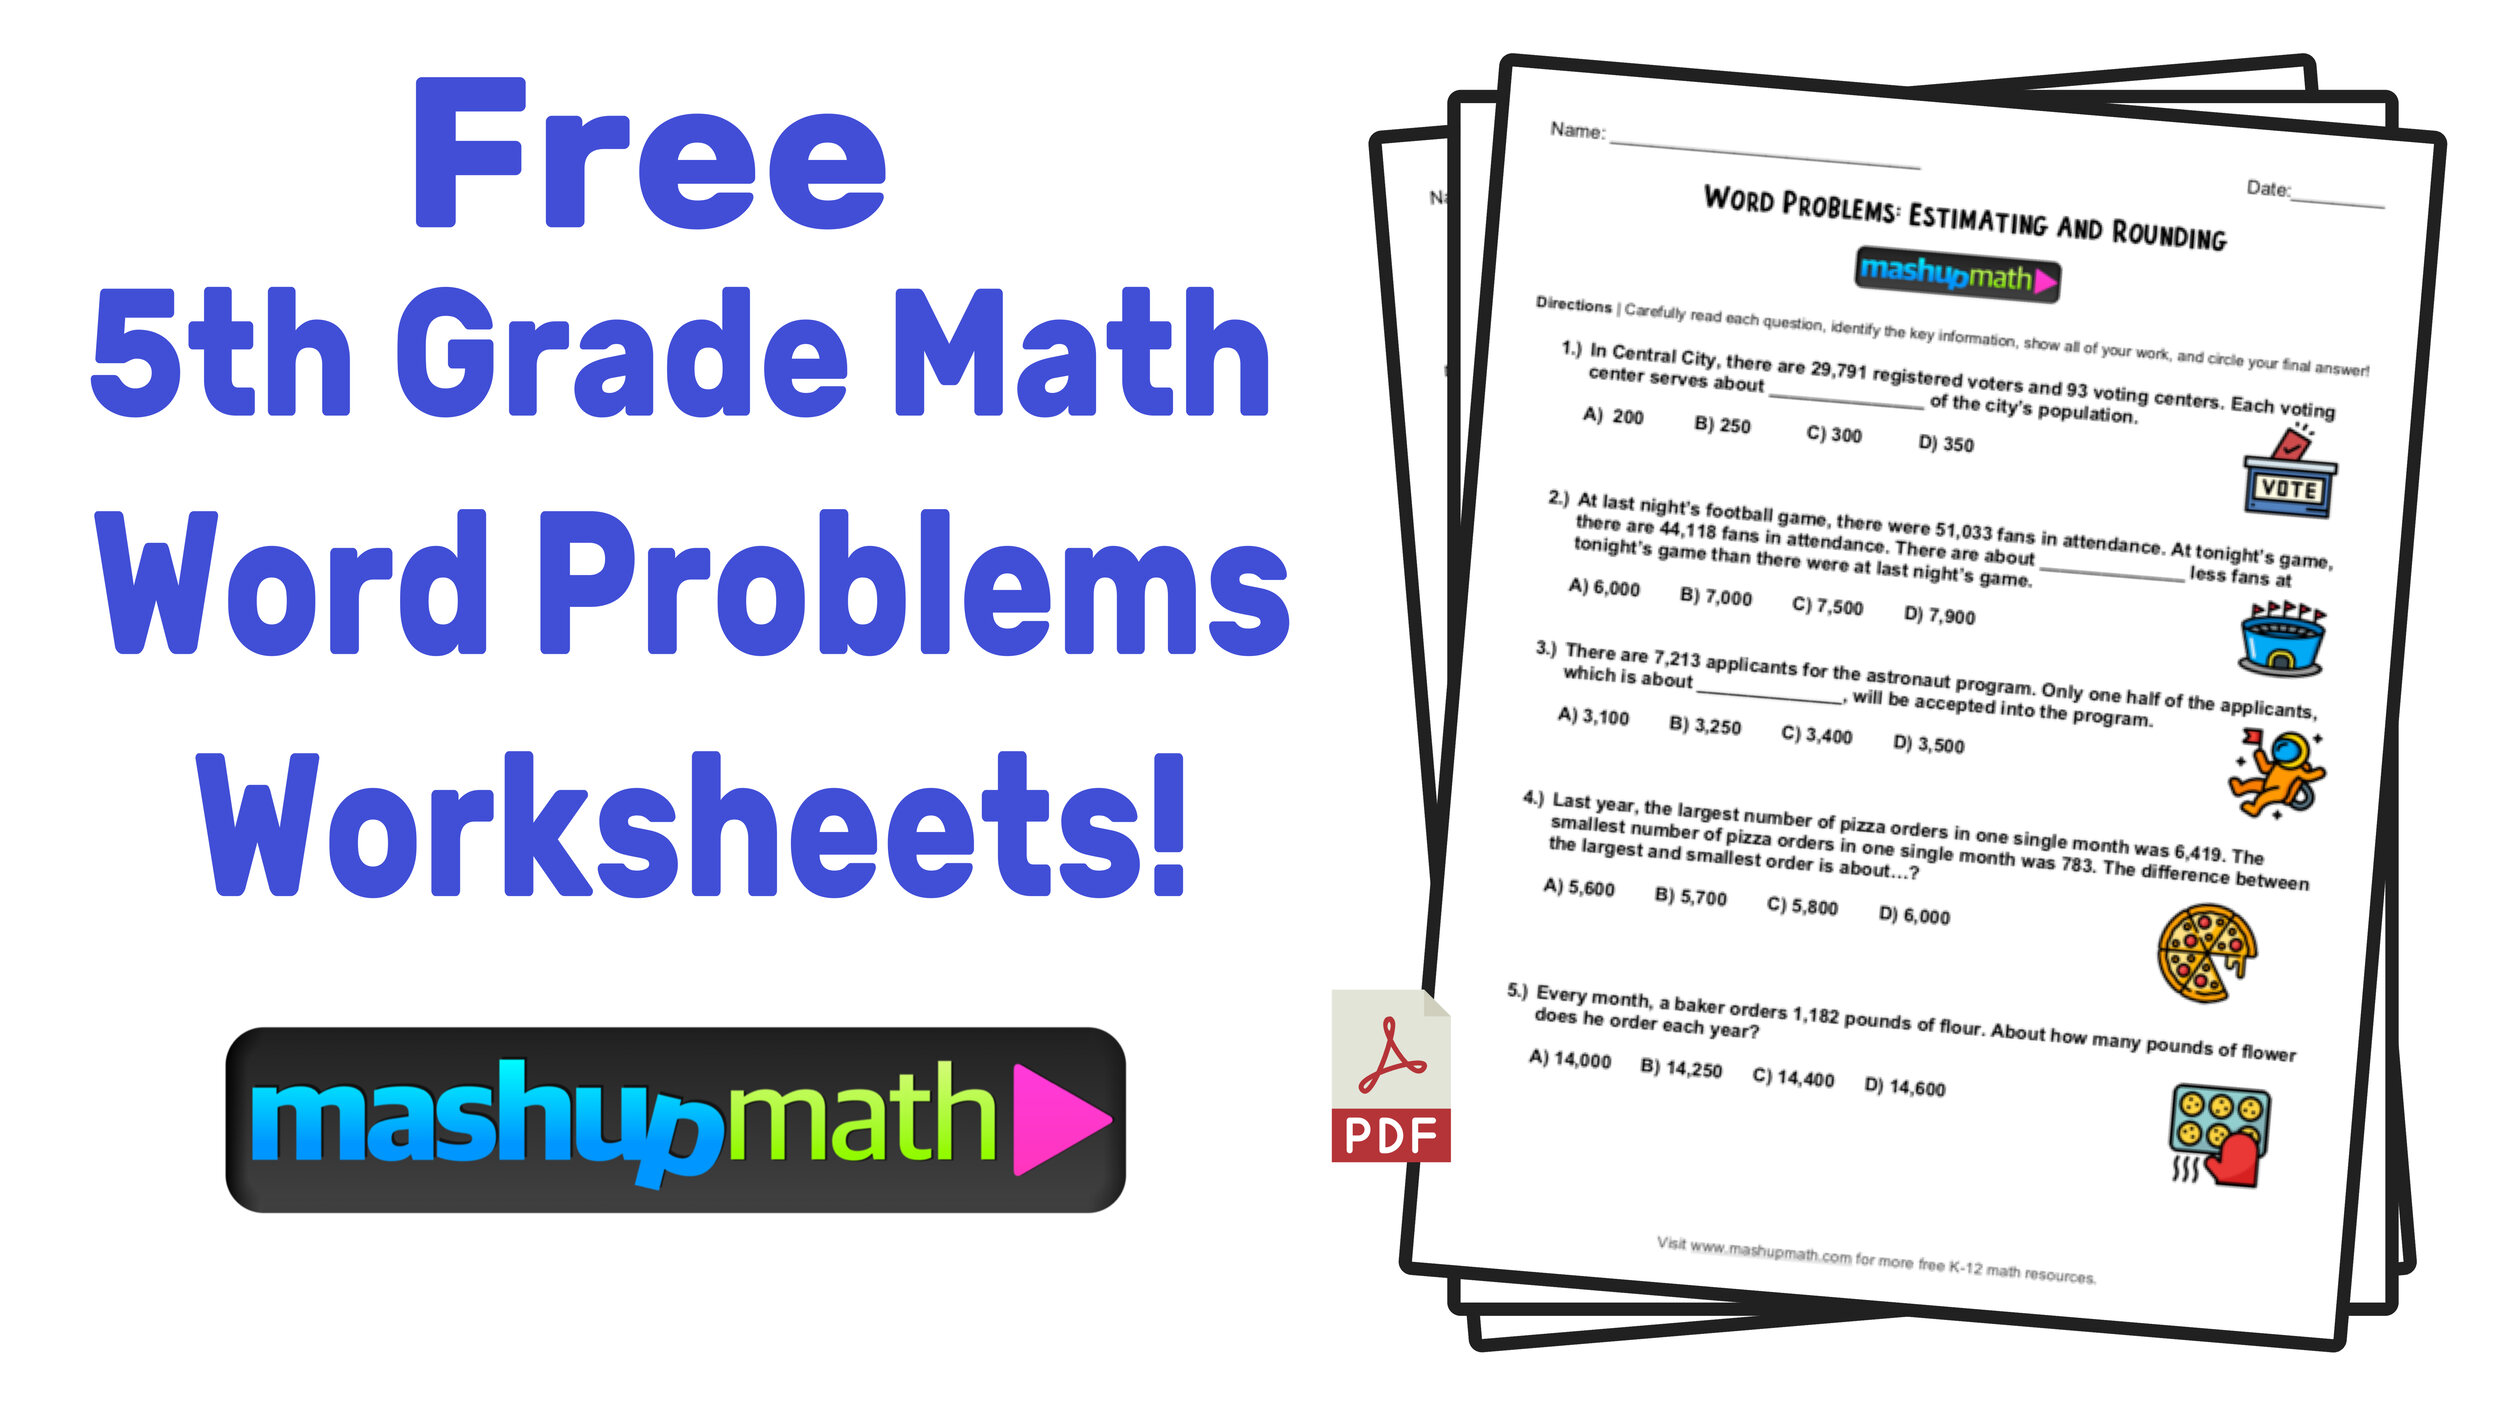 5th Grade Math Word Problems: Free Worksheets with Answers 